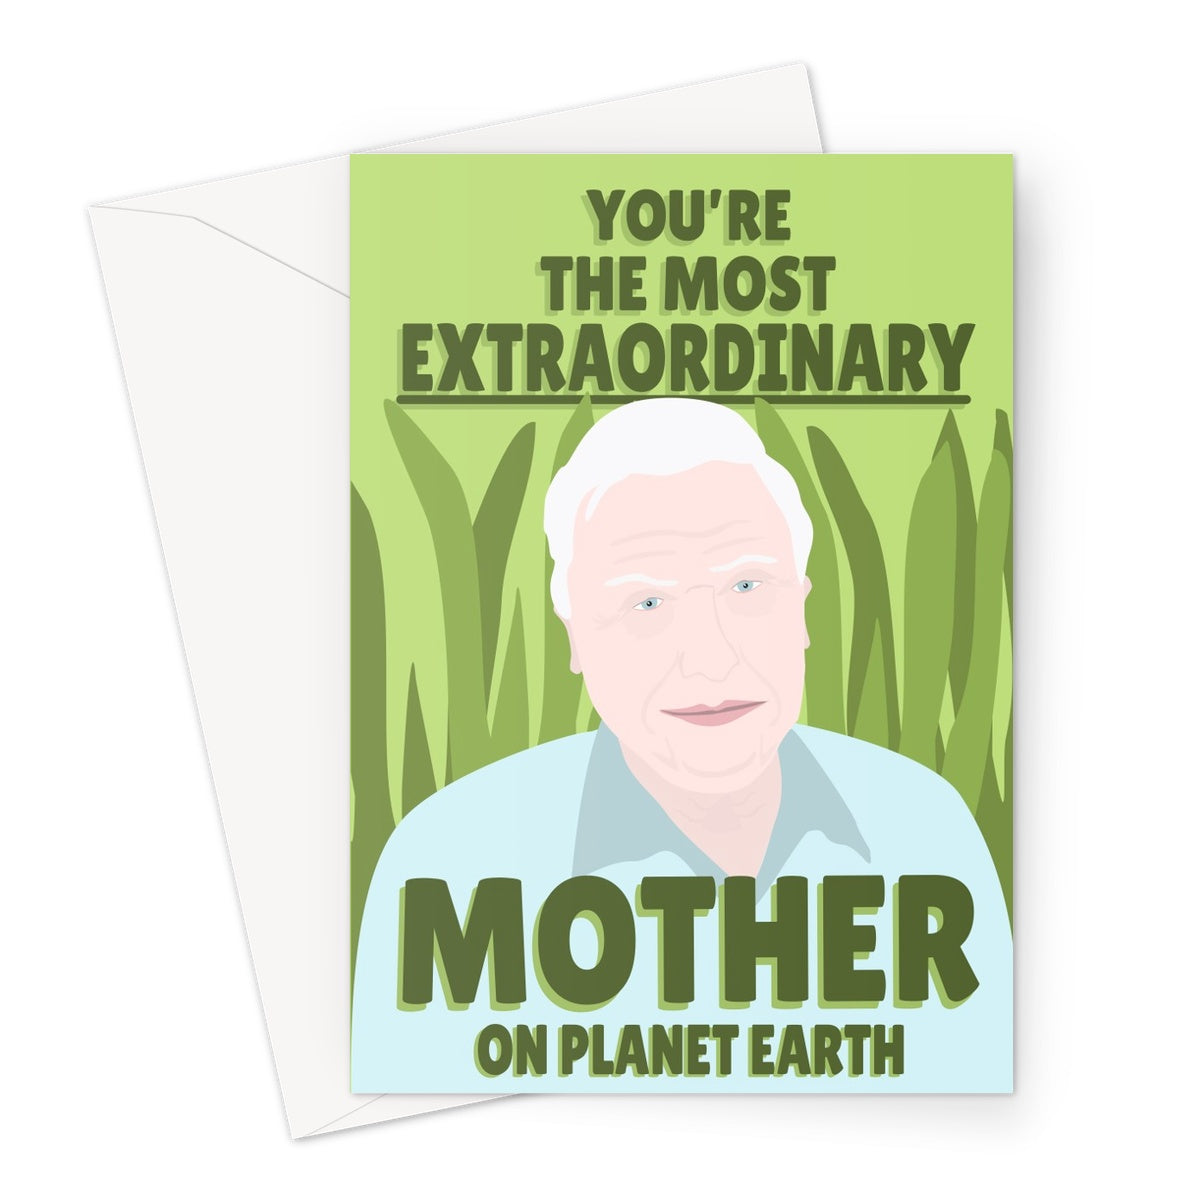 You're The Most Extraordinary Mother on Planet Earth David Attenborough Fan Love Birthday Nature TV Mother's Day Mom Mum Greeting Card